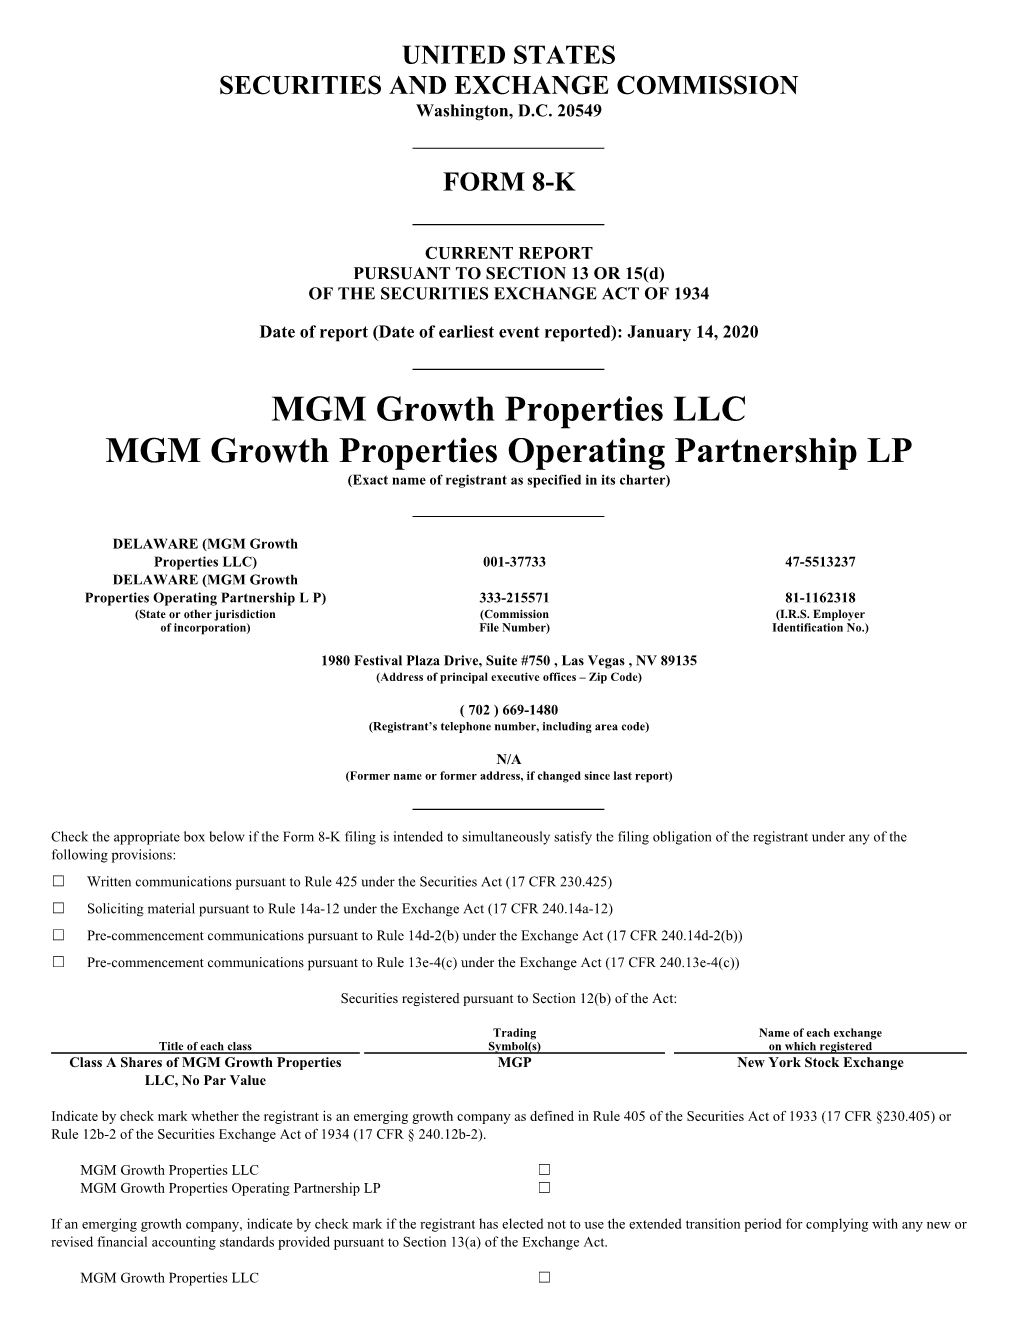 MGM Growth Properties LLC MGM Growth Properties Operating Partnership LP (Exact Name of Registrant As Specified in Its Charter)